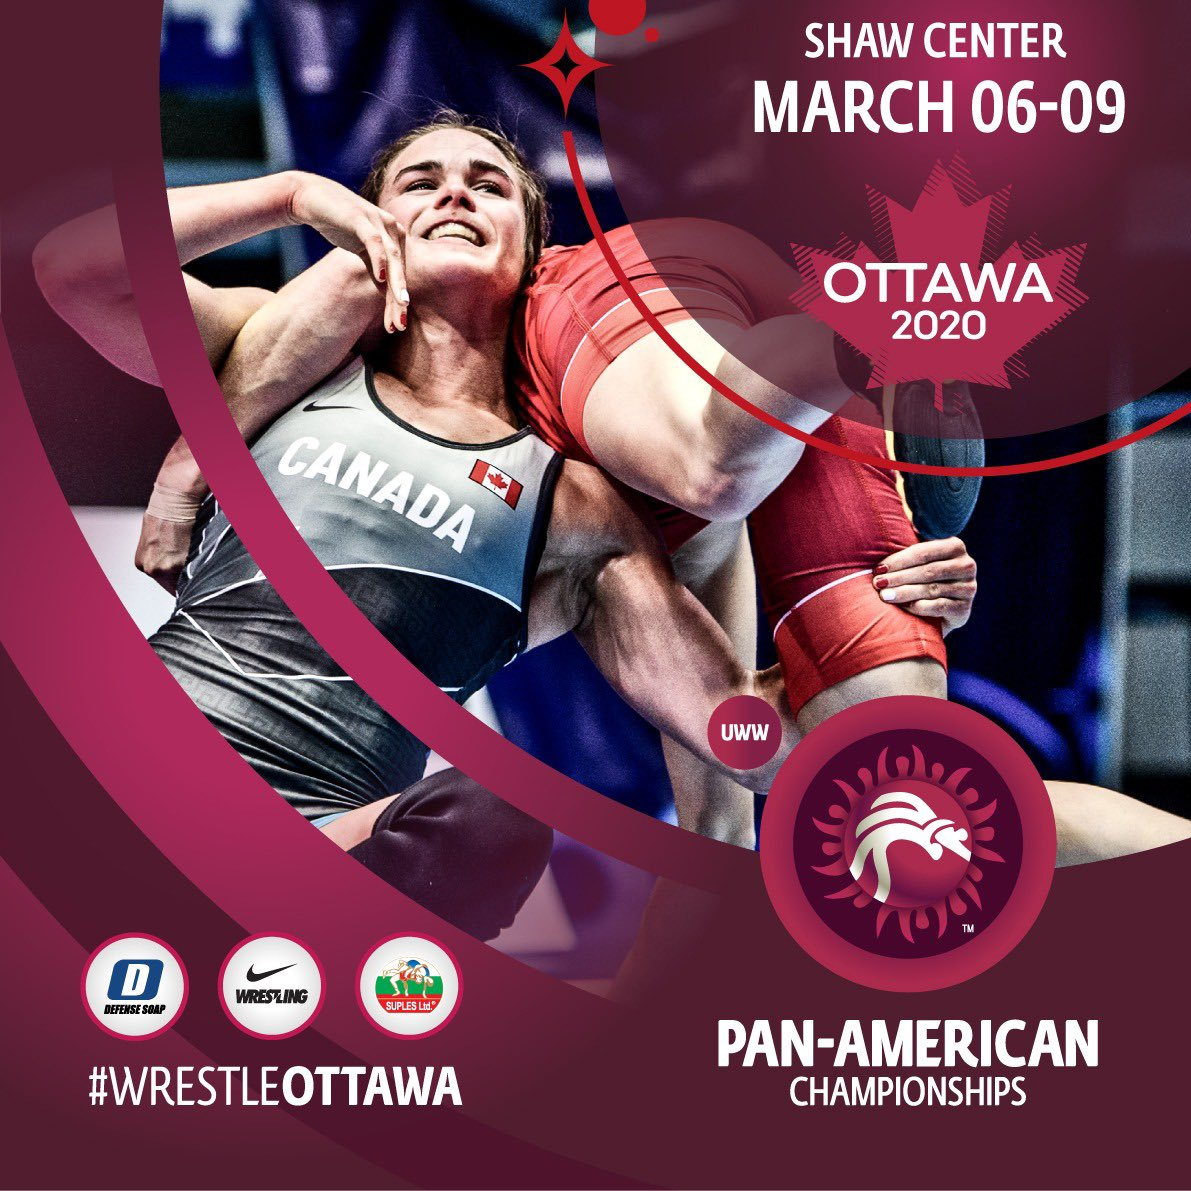 Canadian hopefuls prepared for Pan American Championships test ahead of Olympic qualifier